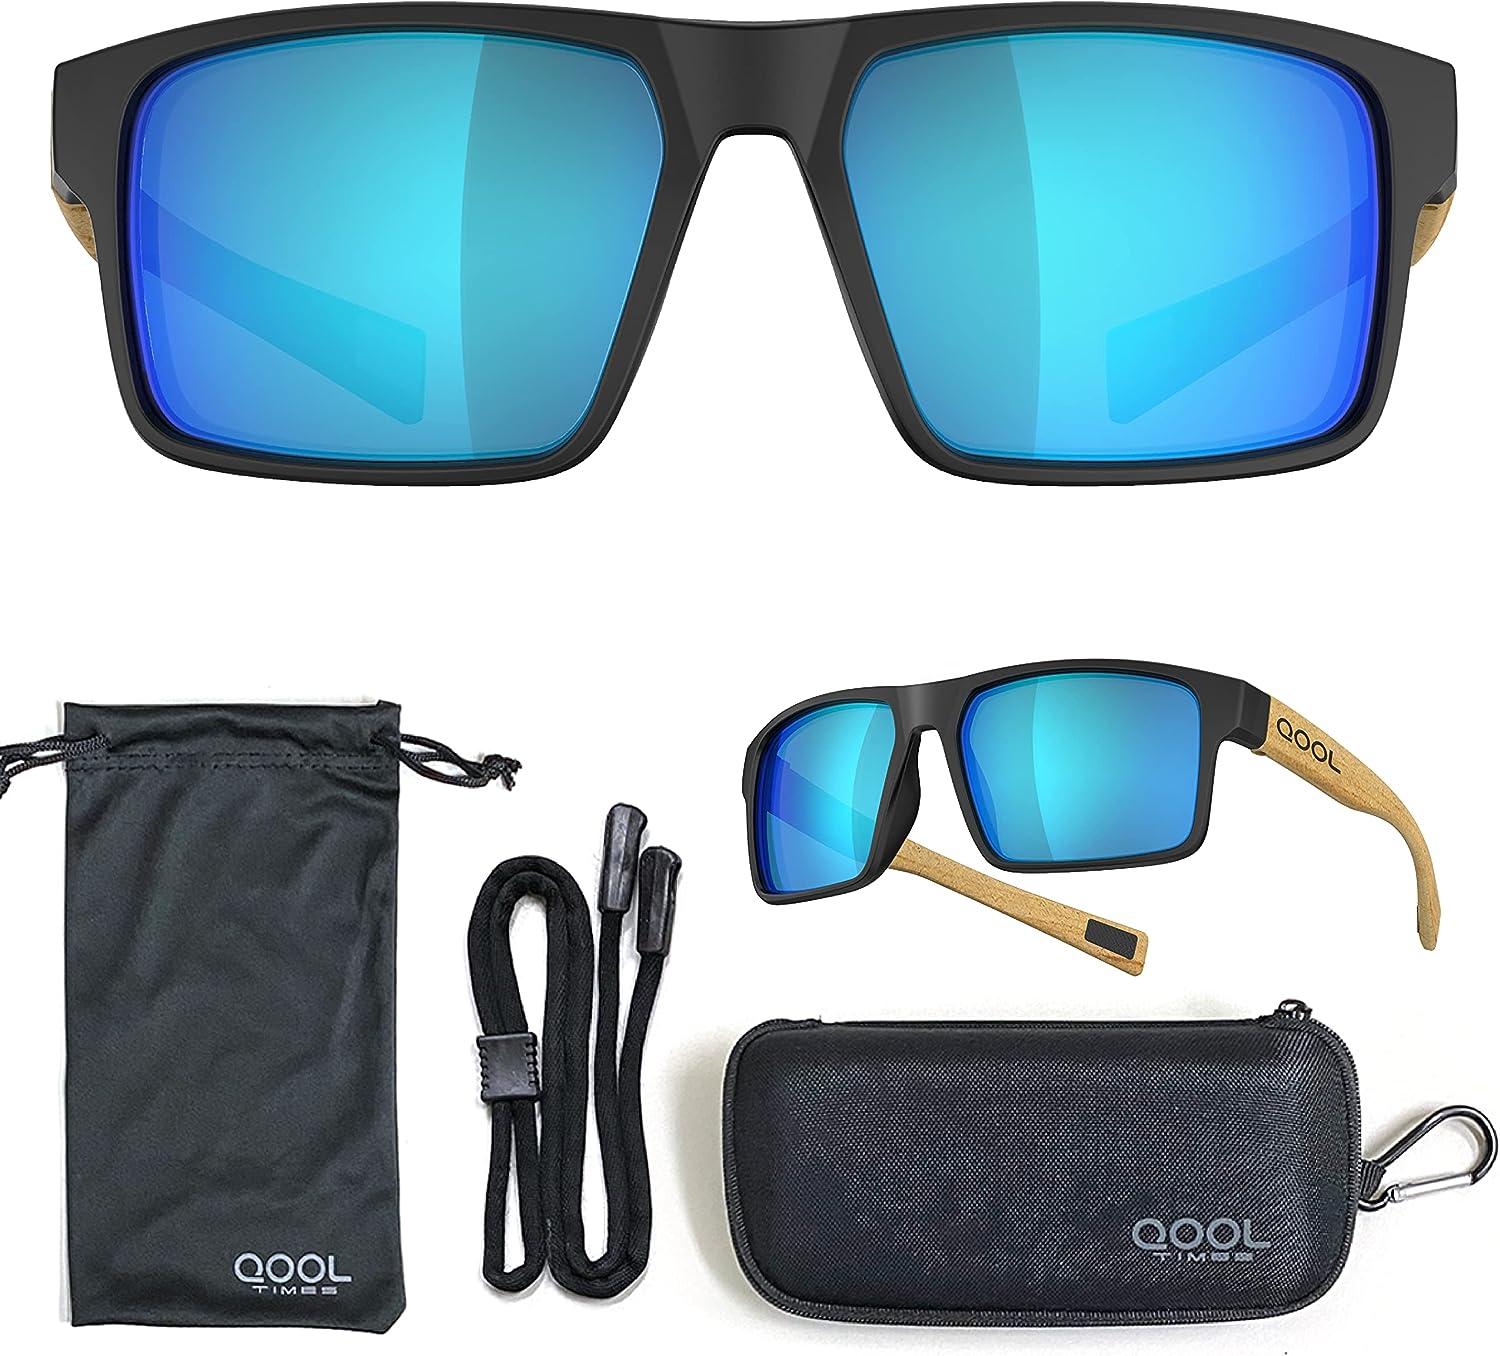 Qool Time Work Polarized Casual sport サングラス， Running Driving Boating G